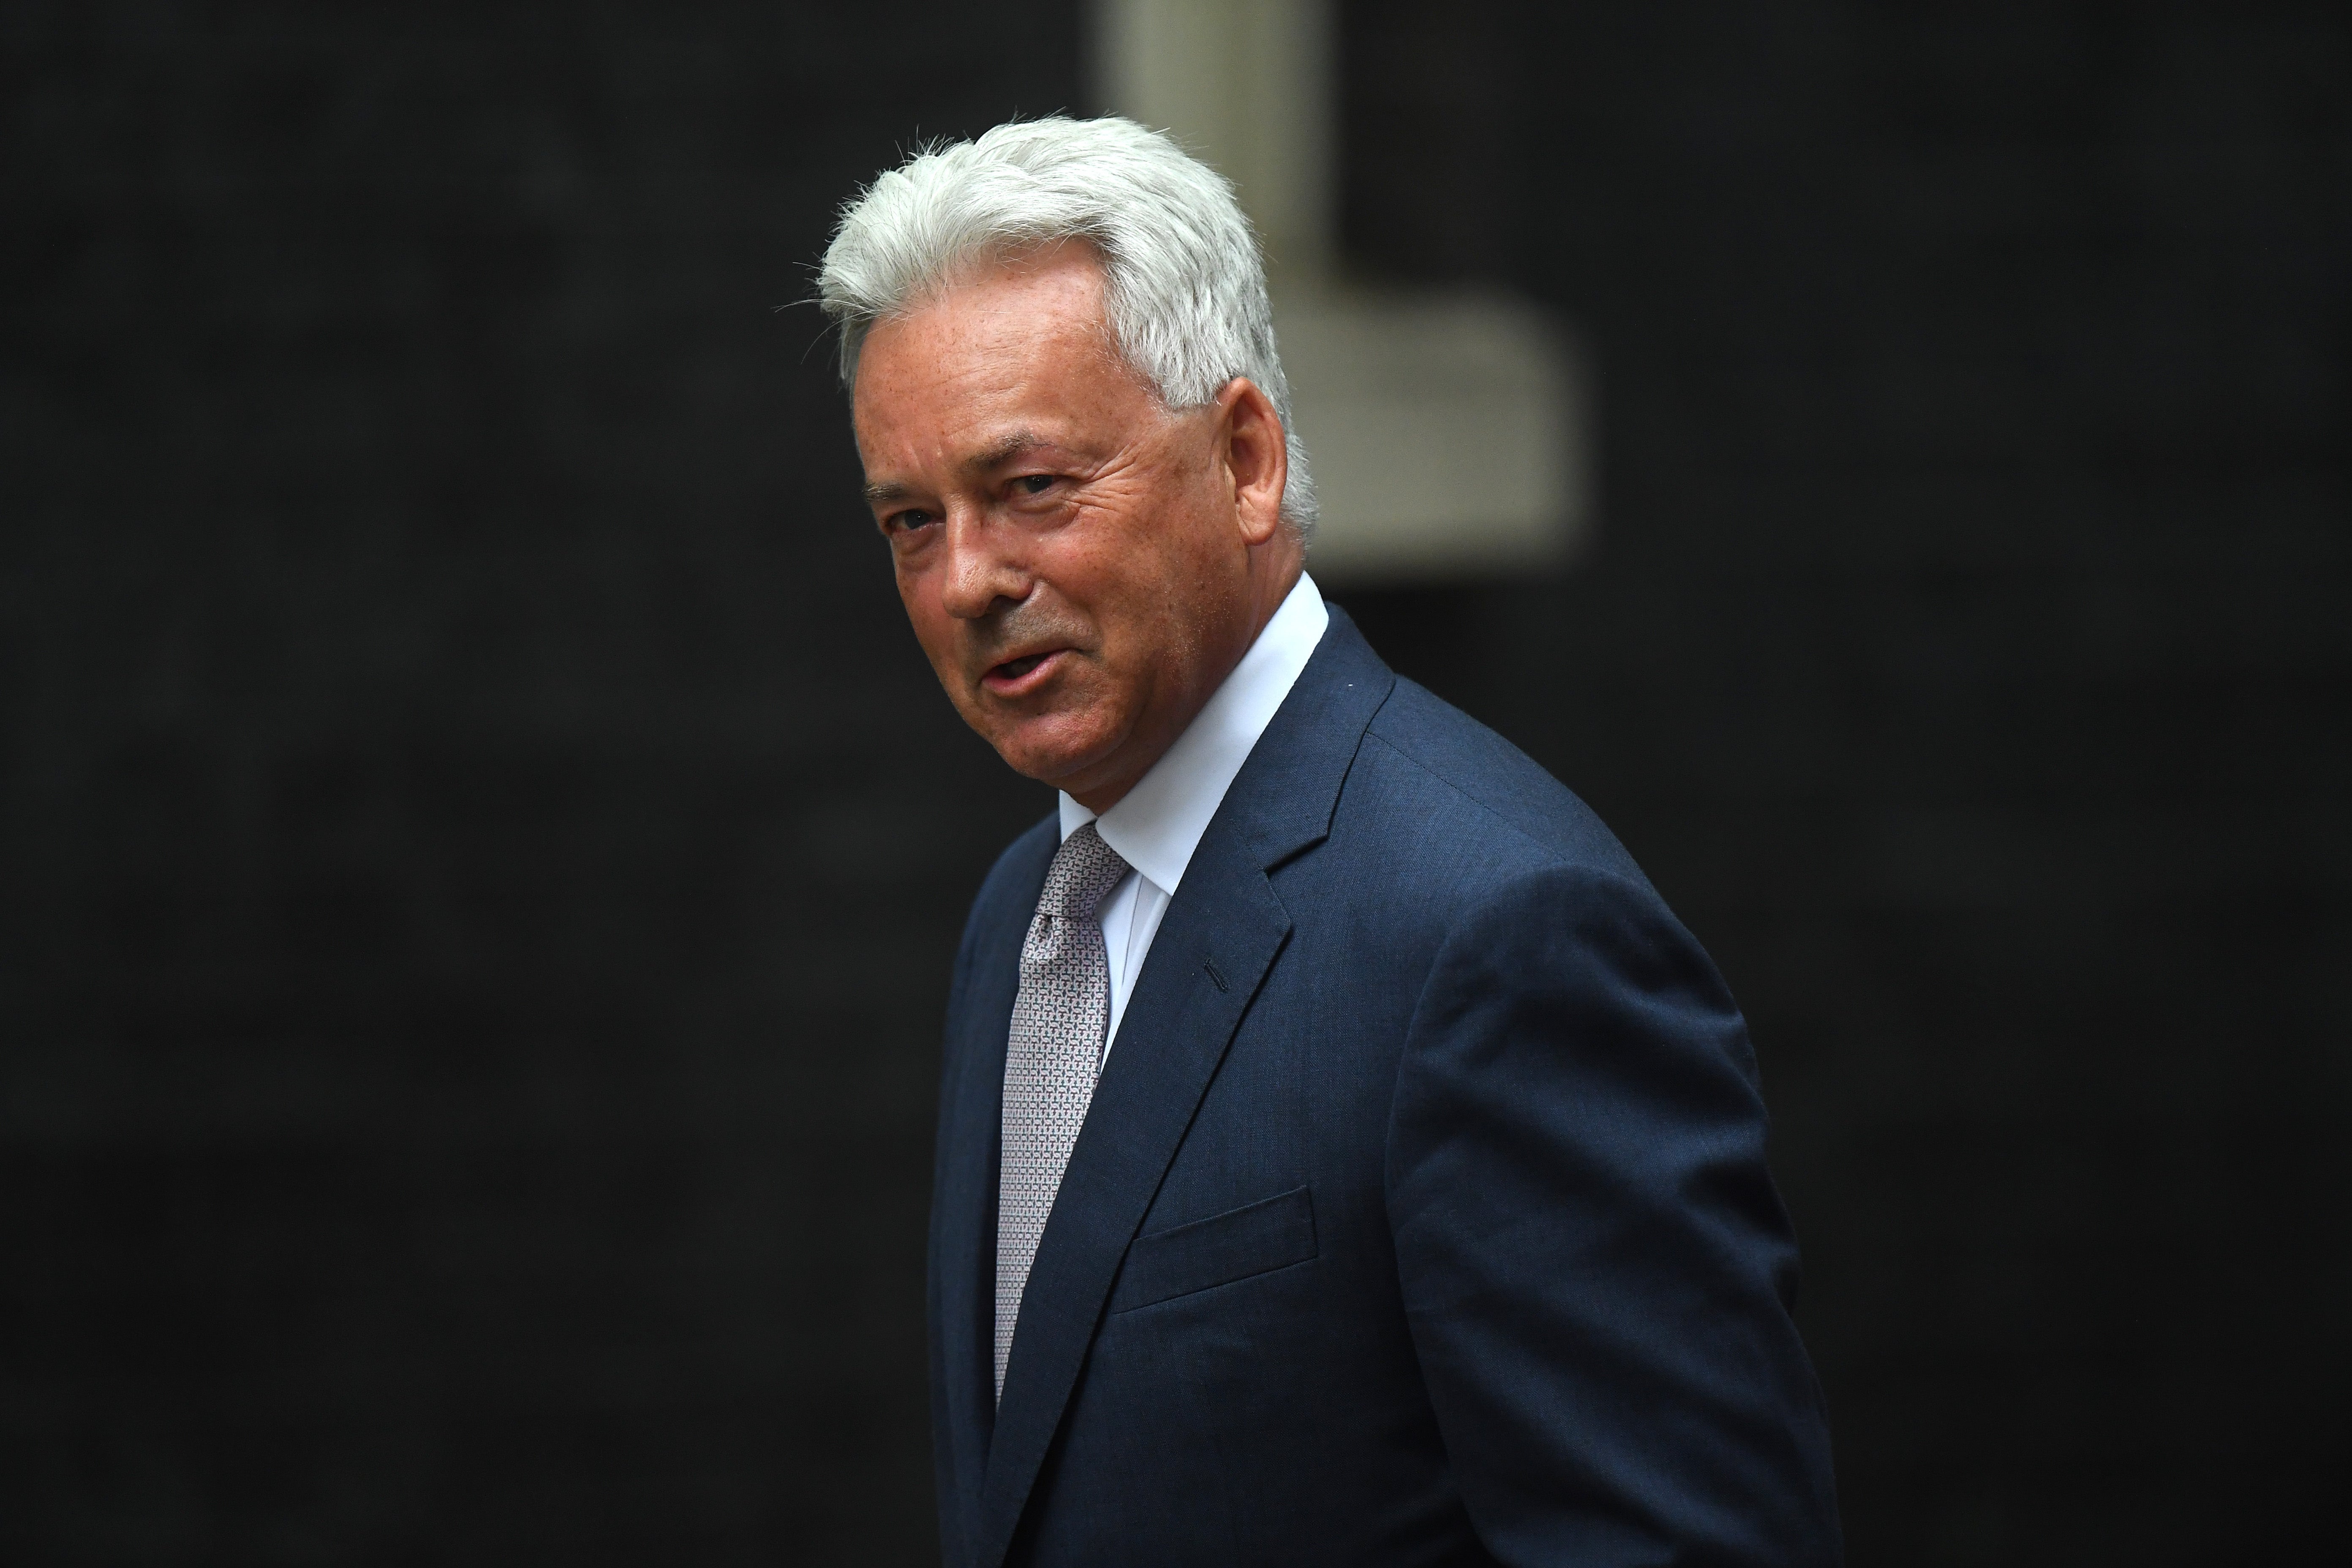 Sir Alan Duncan said ‘the Conservative Friends of Israel group was “doing the bidding of Netanyahu’